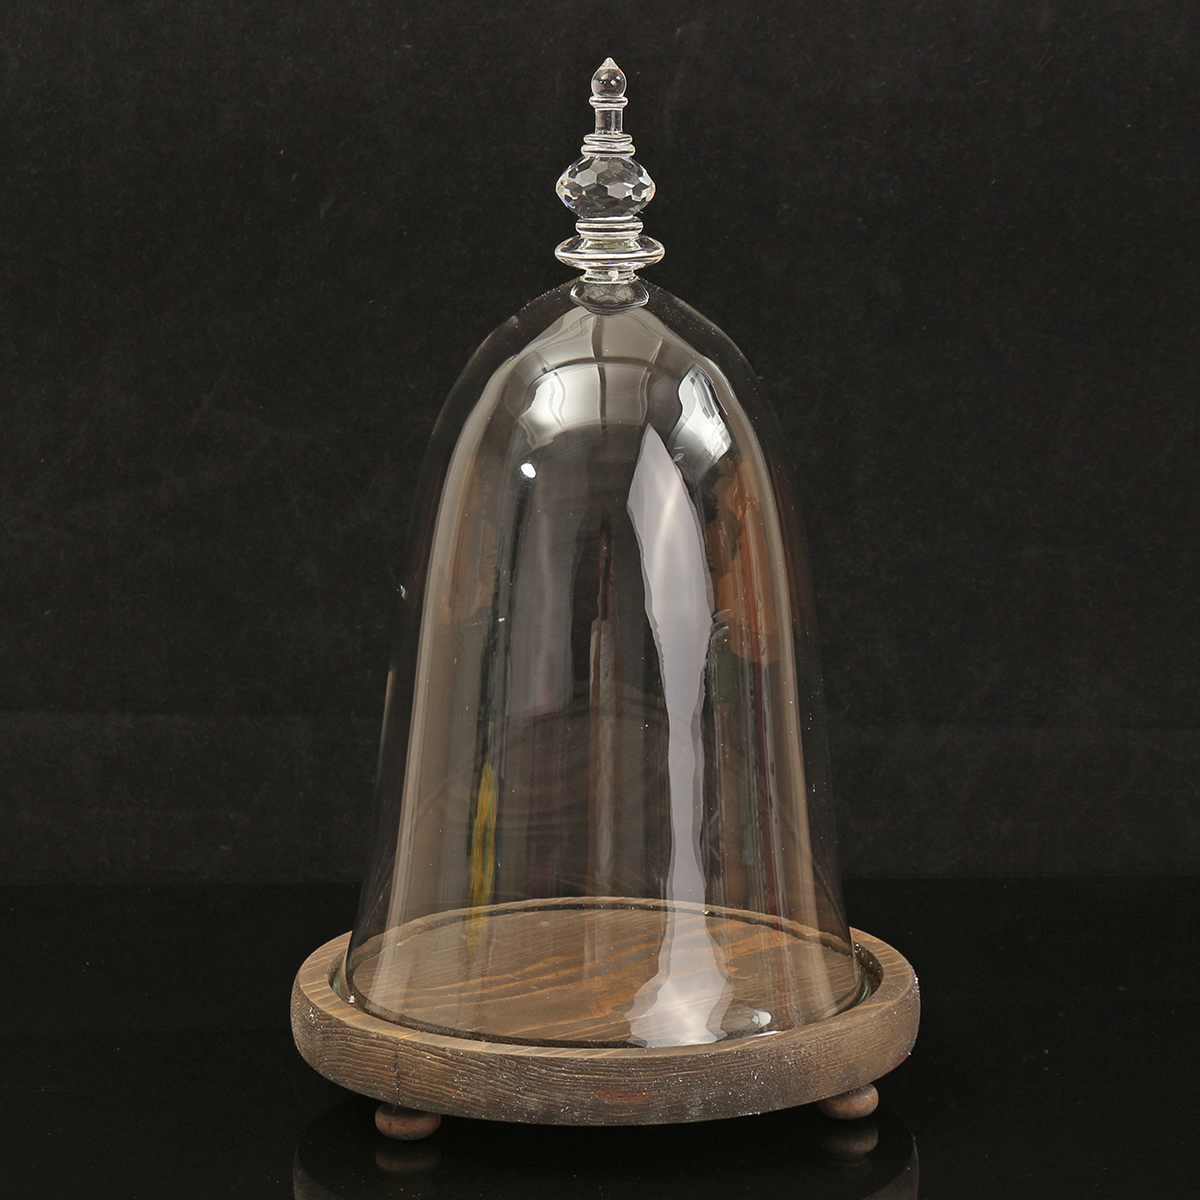 Home Decor Vases Glass Flower Display Cloche Bell Jar Dome Immortal Preservation With Wooden Base Everlasting Flower Glass Cover: Black